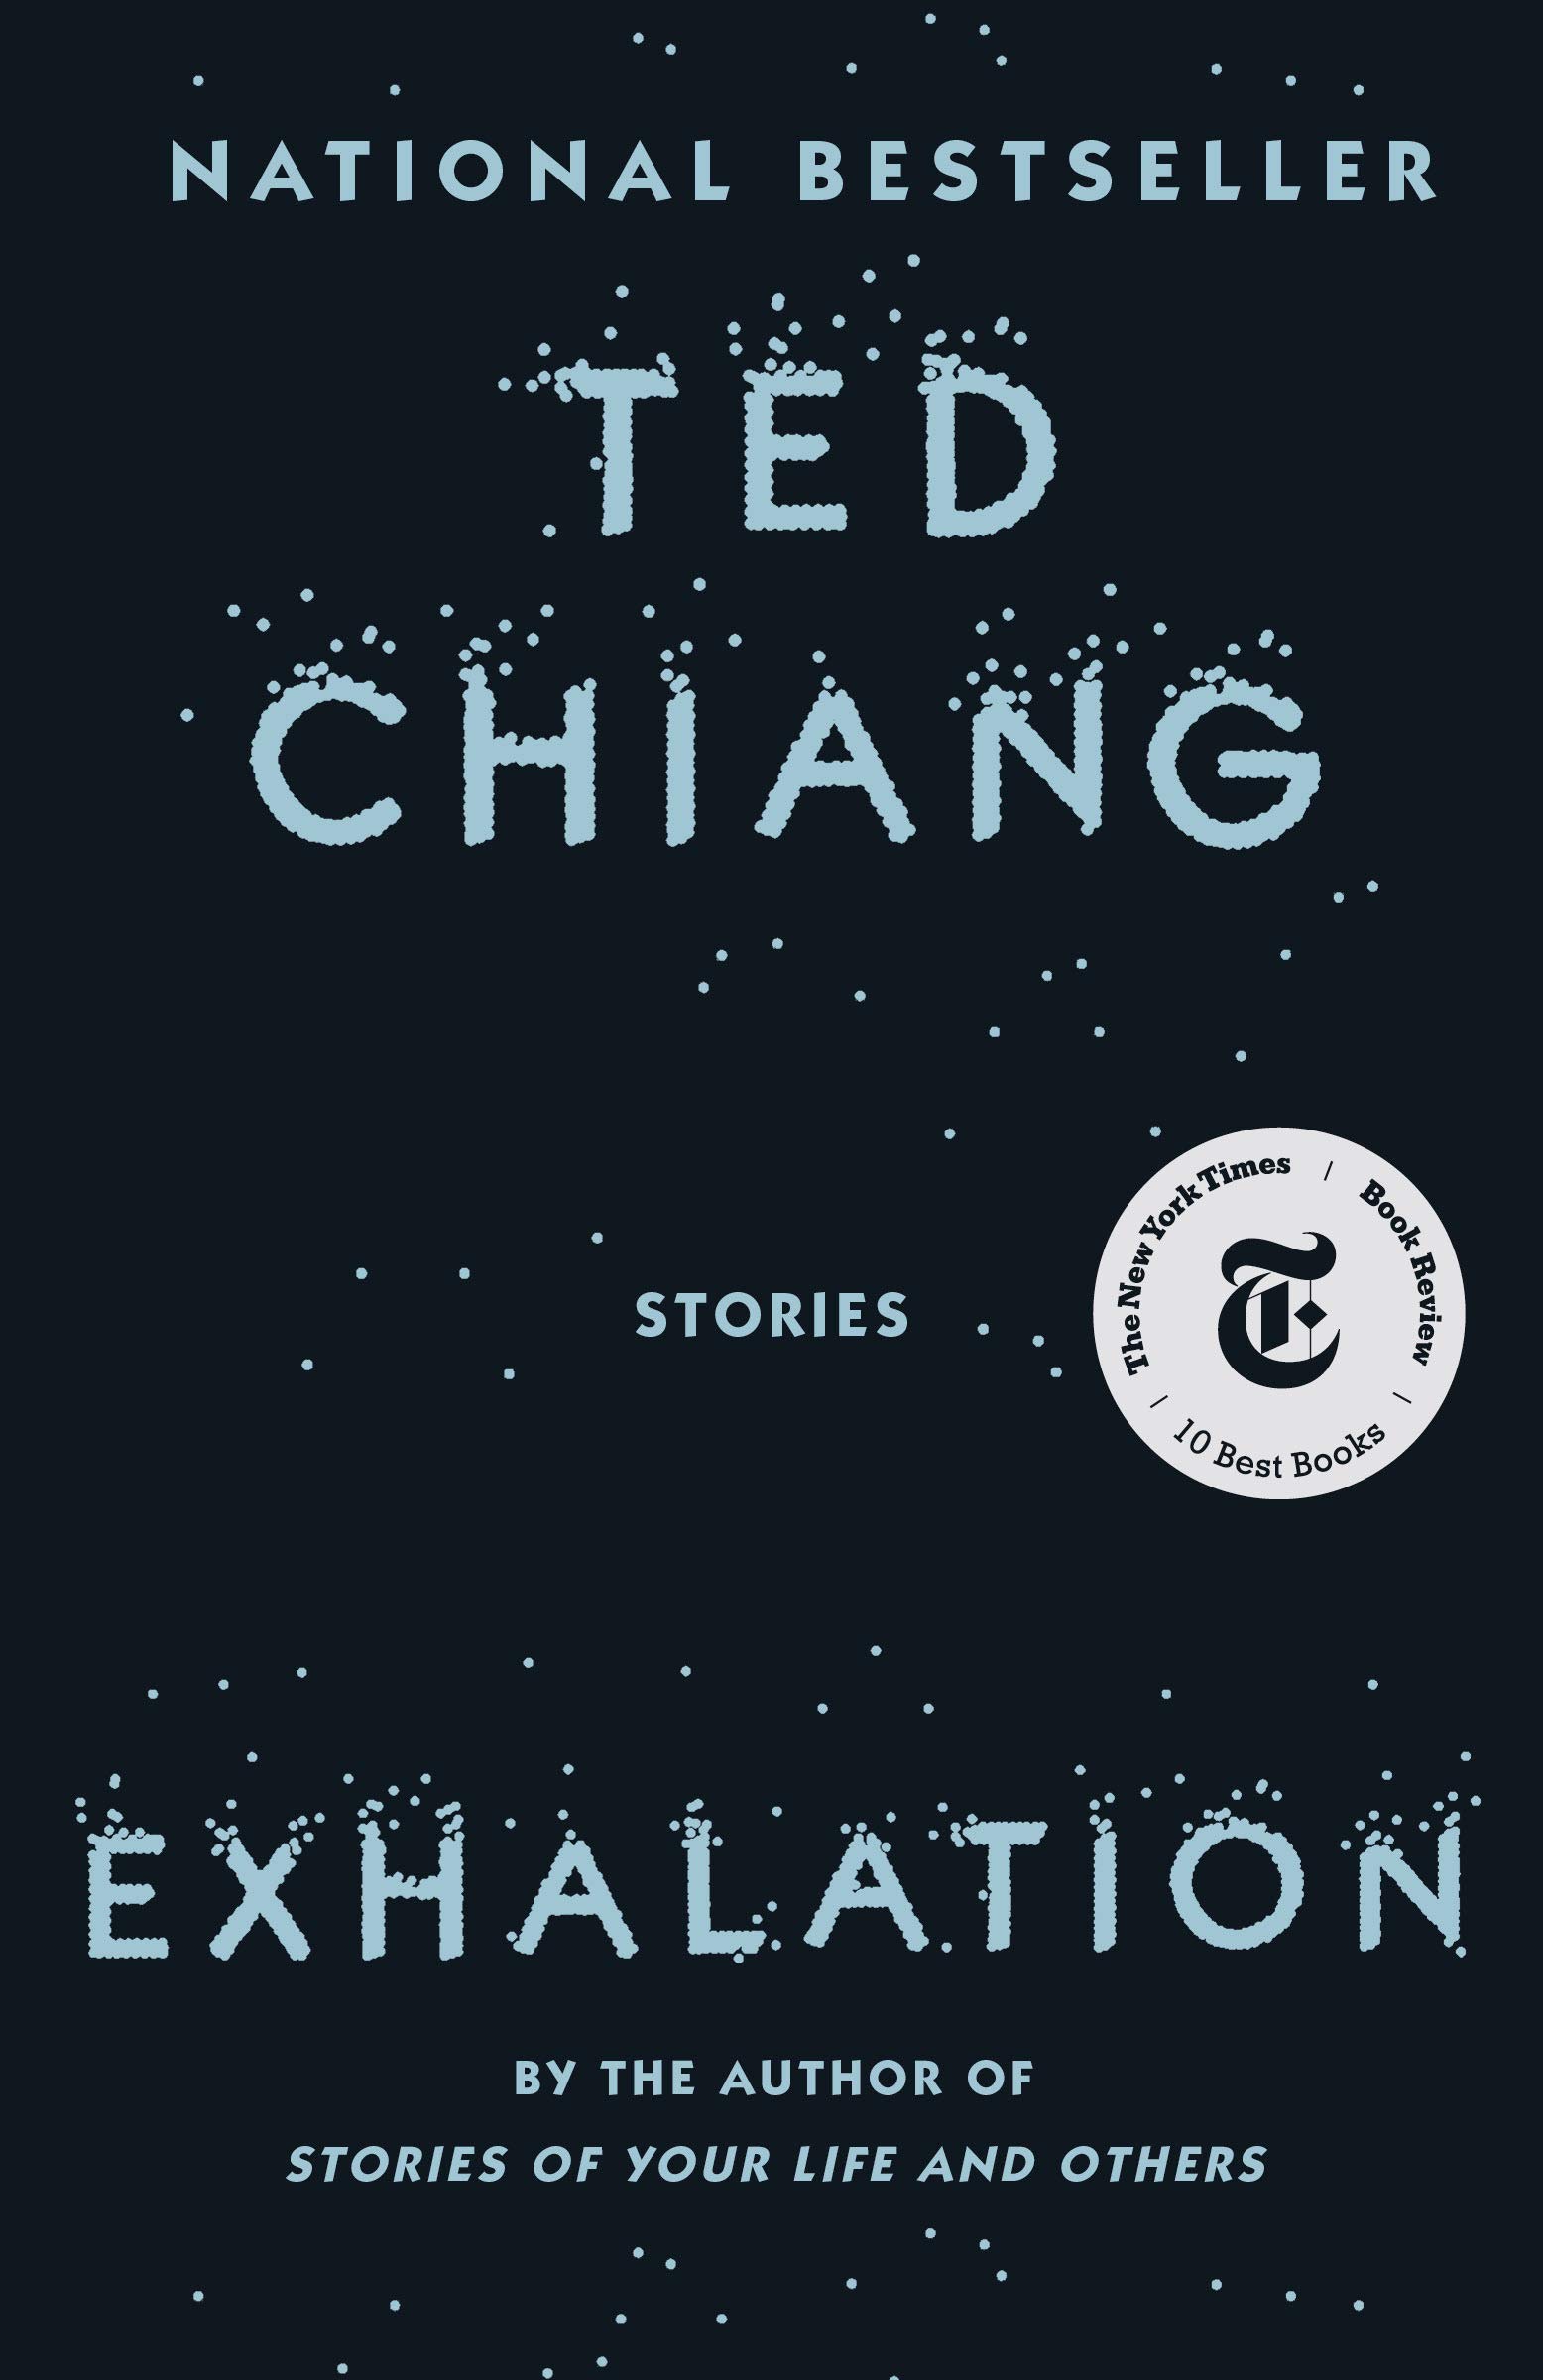 Exhalation: Stories (eBook) by Ted Chiang $1.99